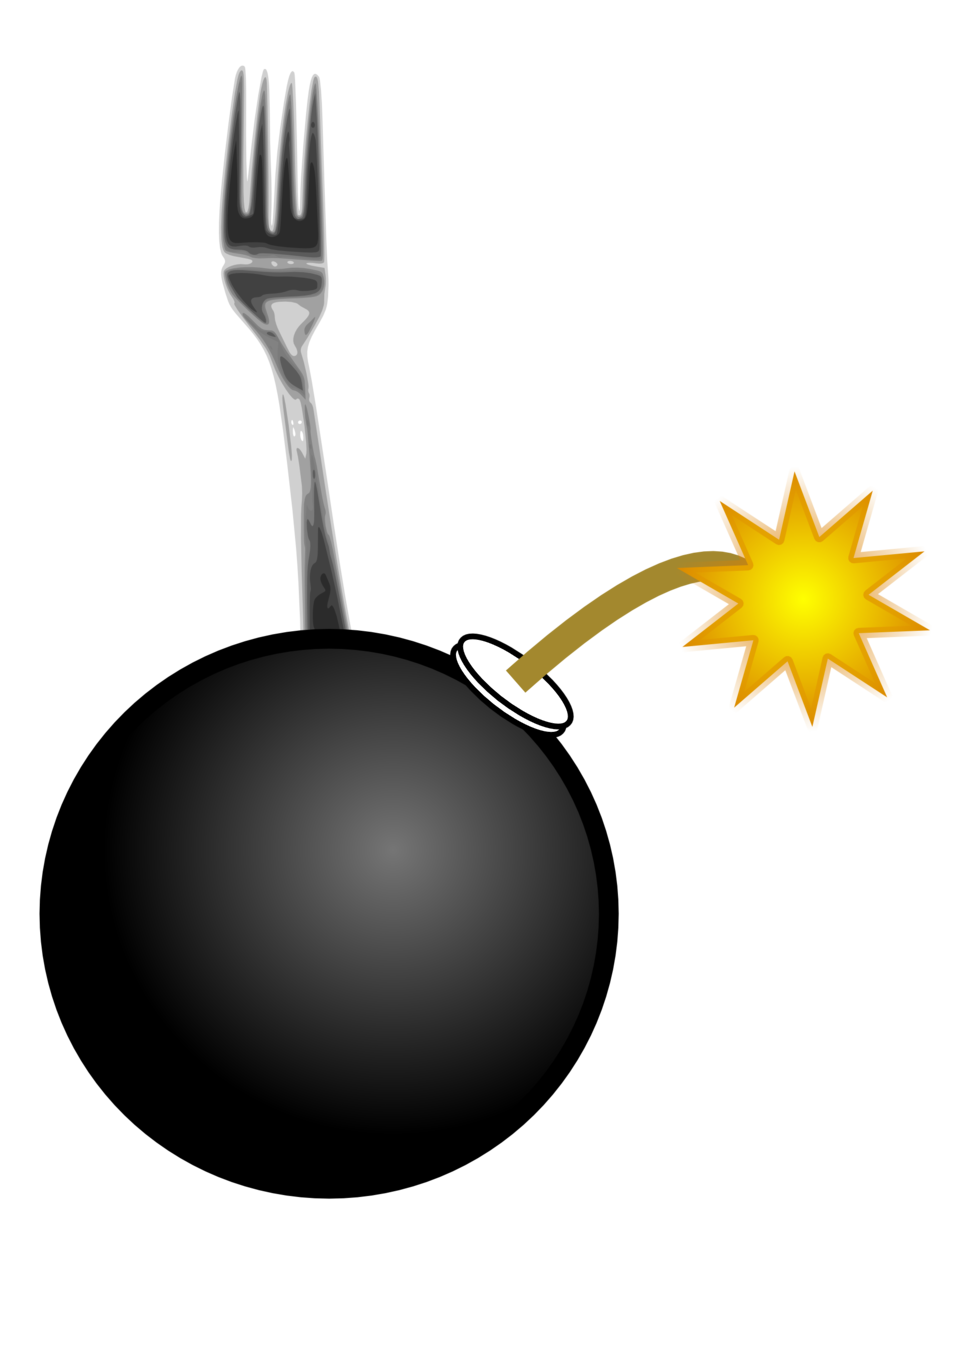 Bomb PNG Background Image